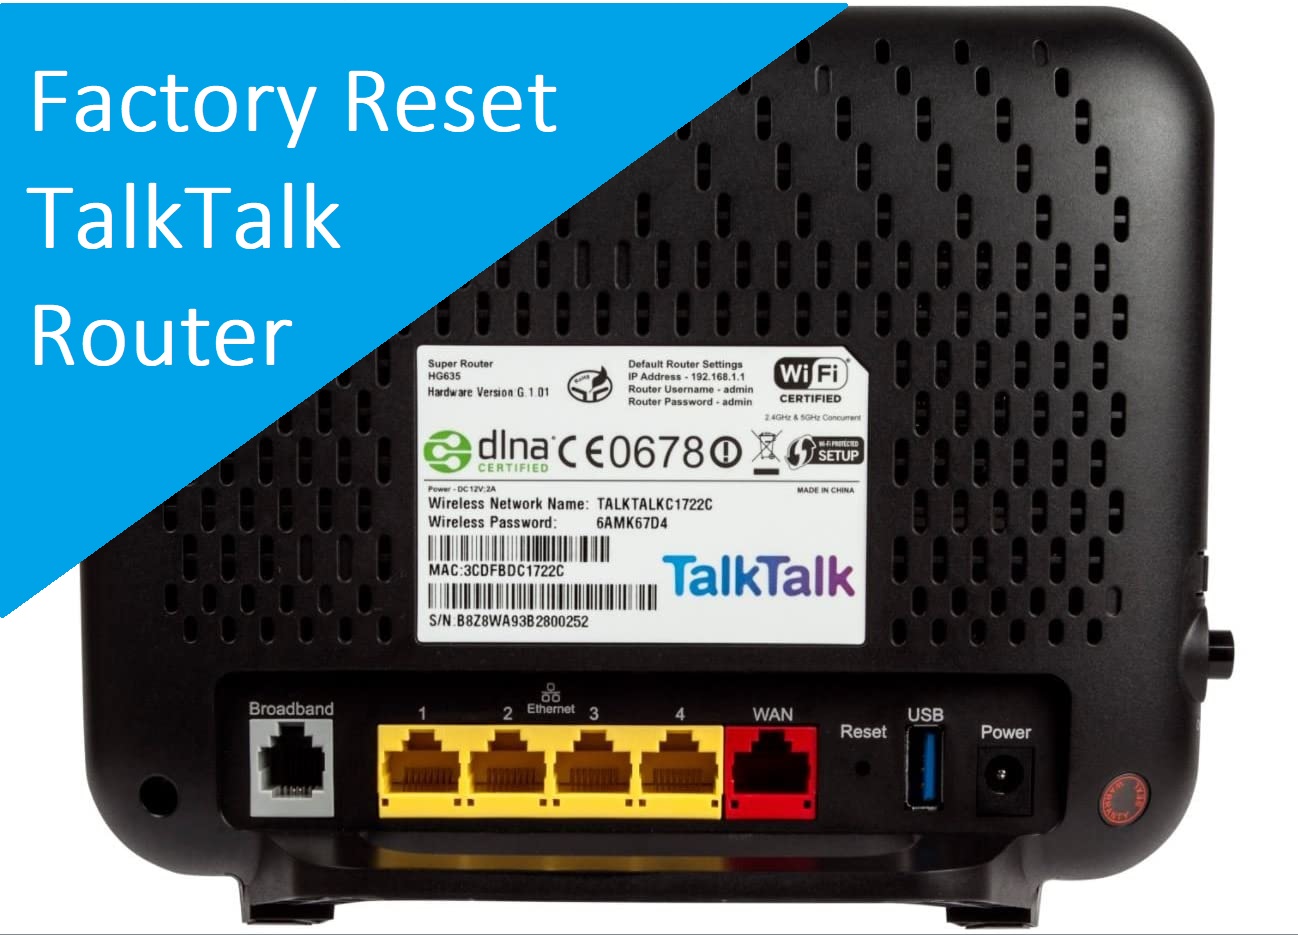 How To Reset Talk Talk Router: Step-By-Step